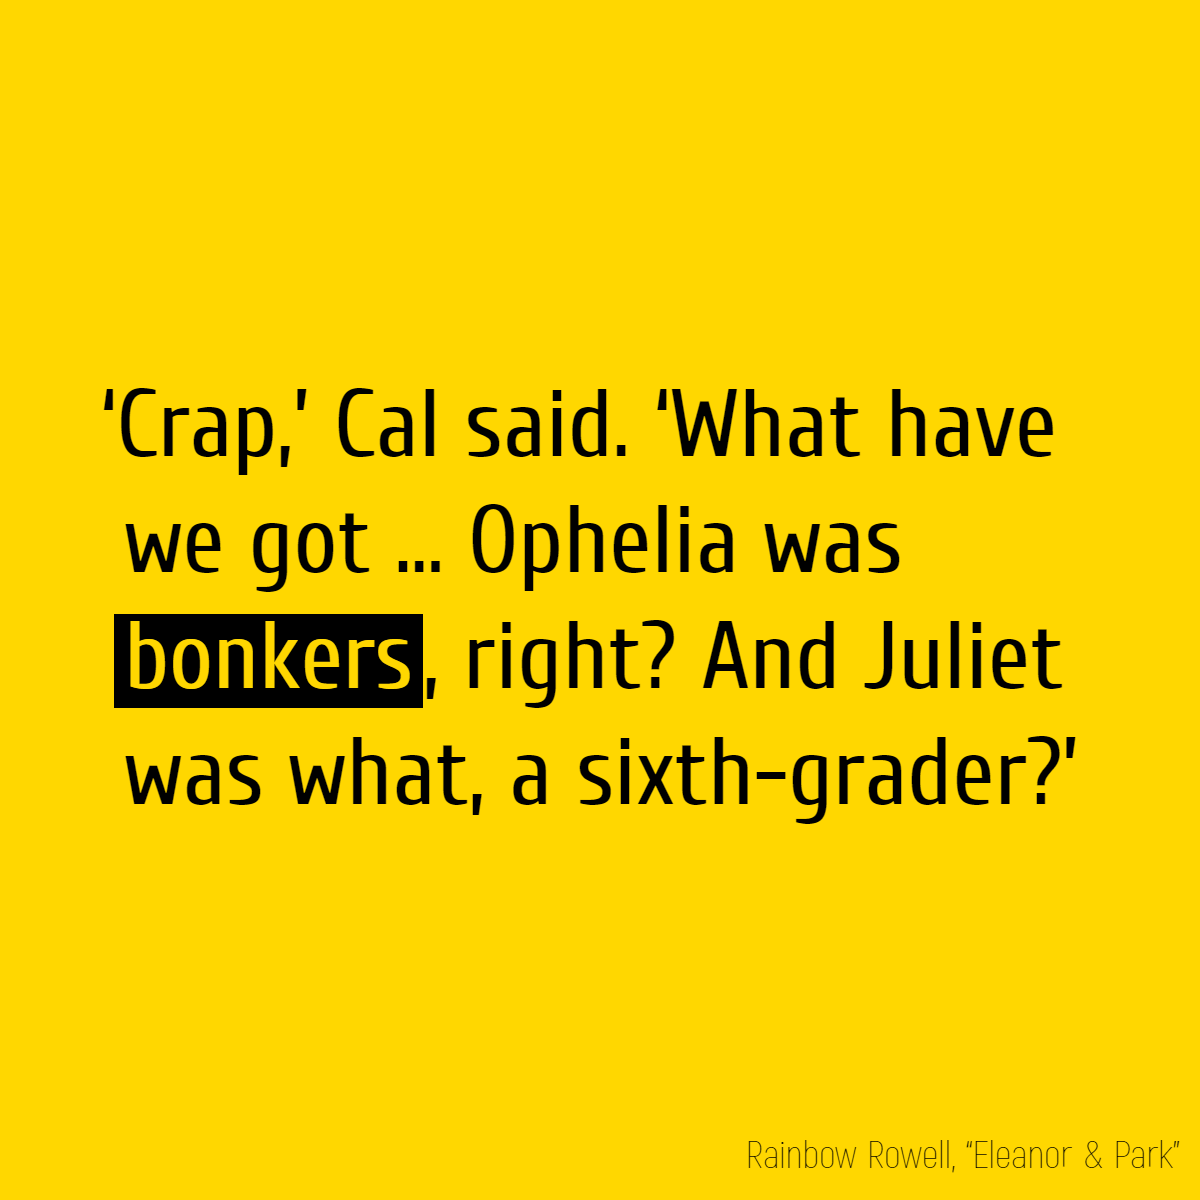 ‘Crap,’ Cal said. ‘What have we got ... Ophelia was bonkers, right? And Juliet was what, a sixth-grader?’